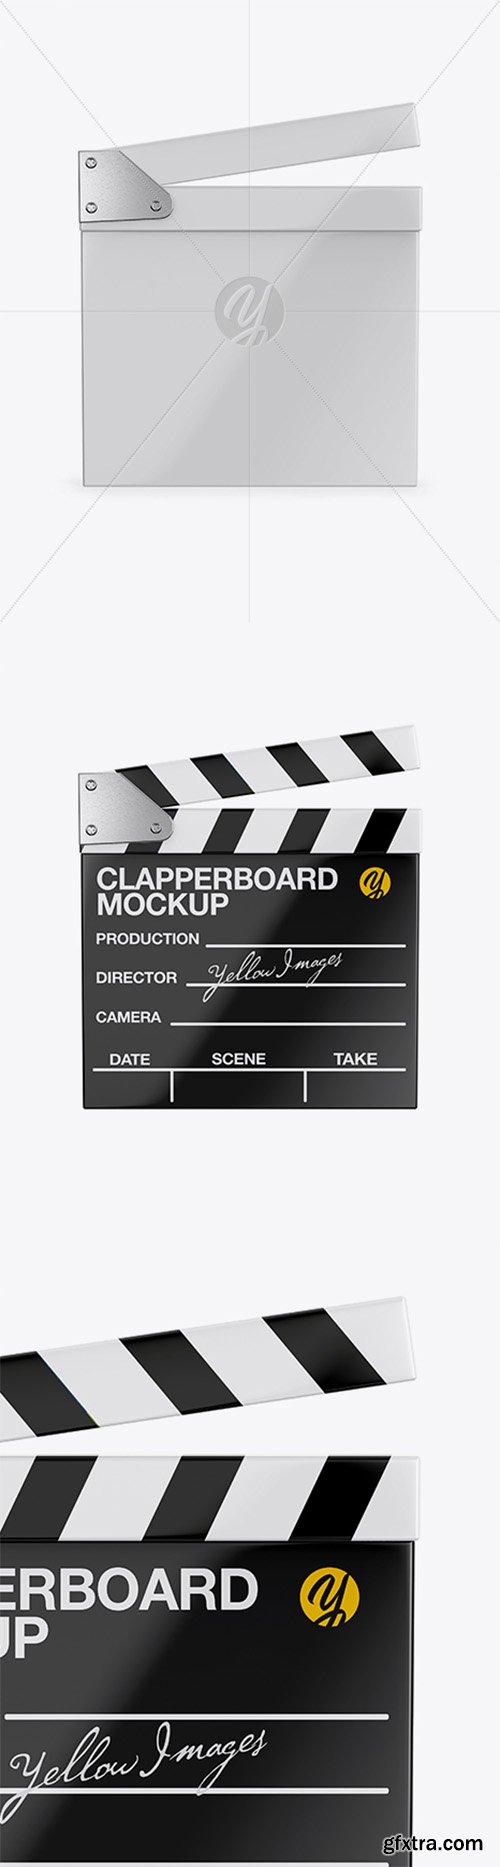 Glossy Clapperboard Mockup - Front View 26043